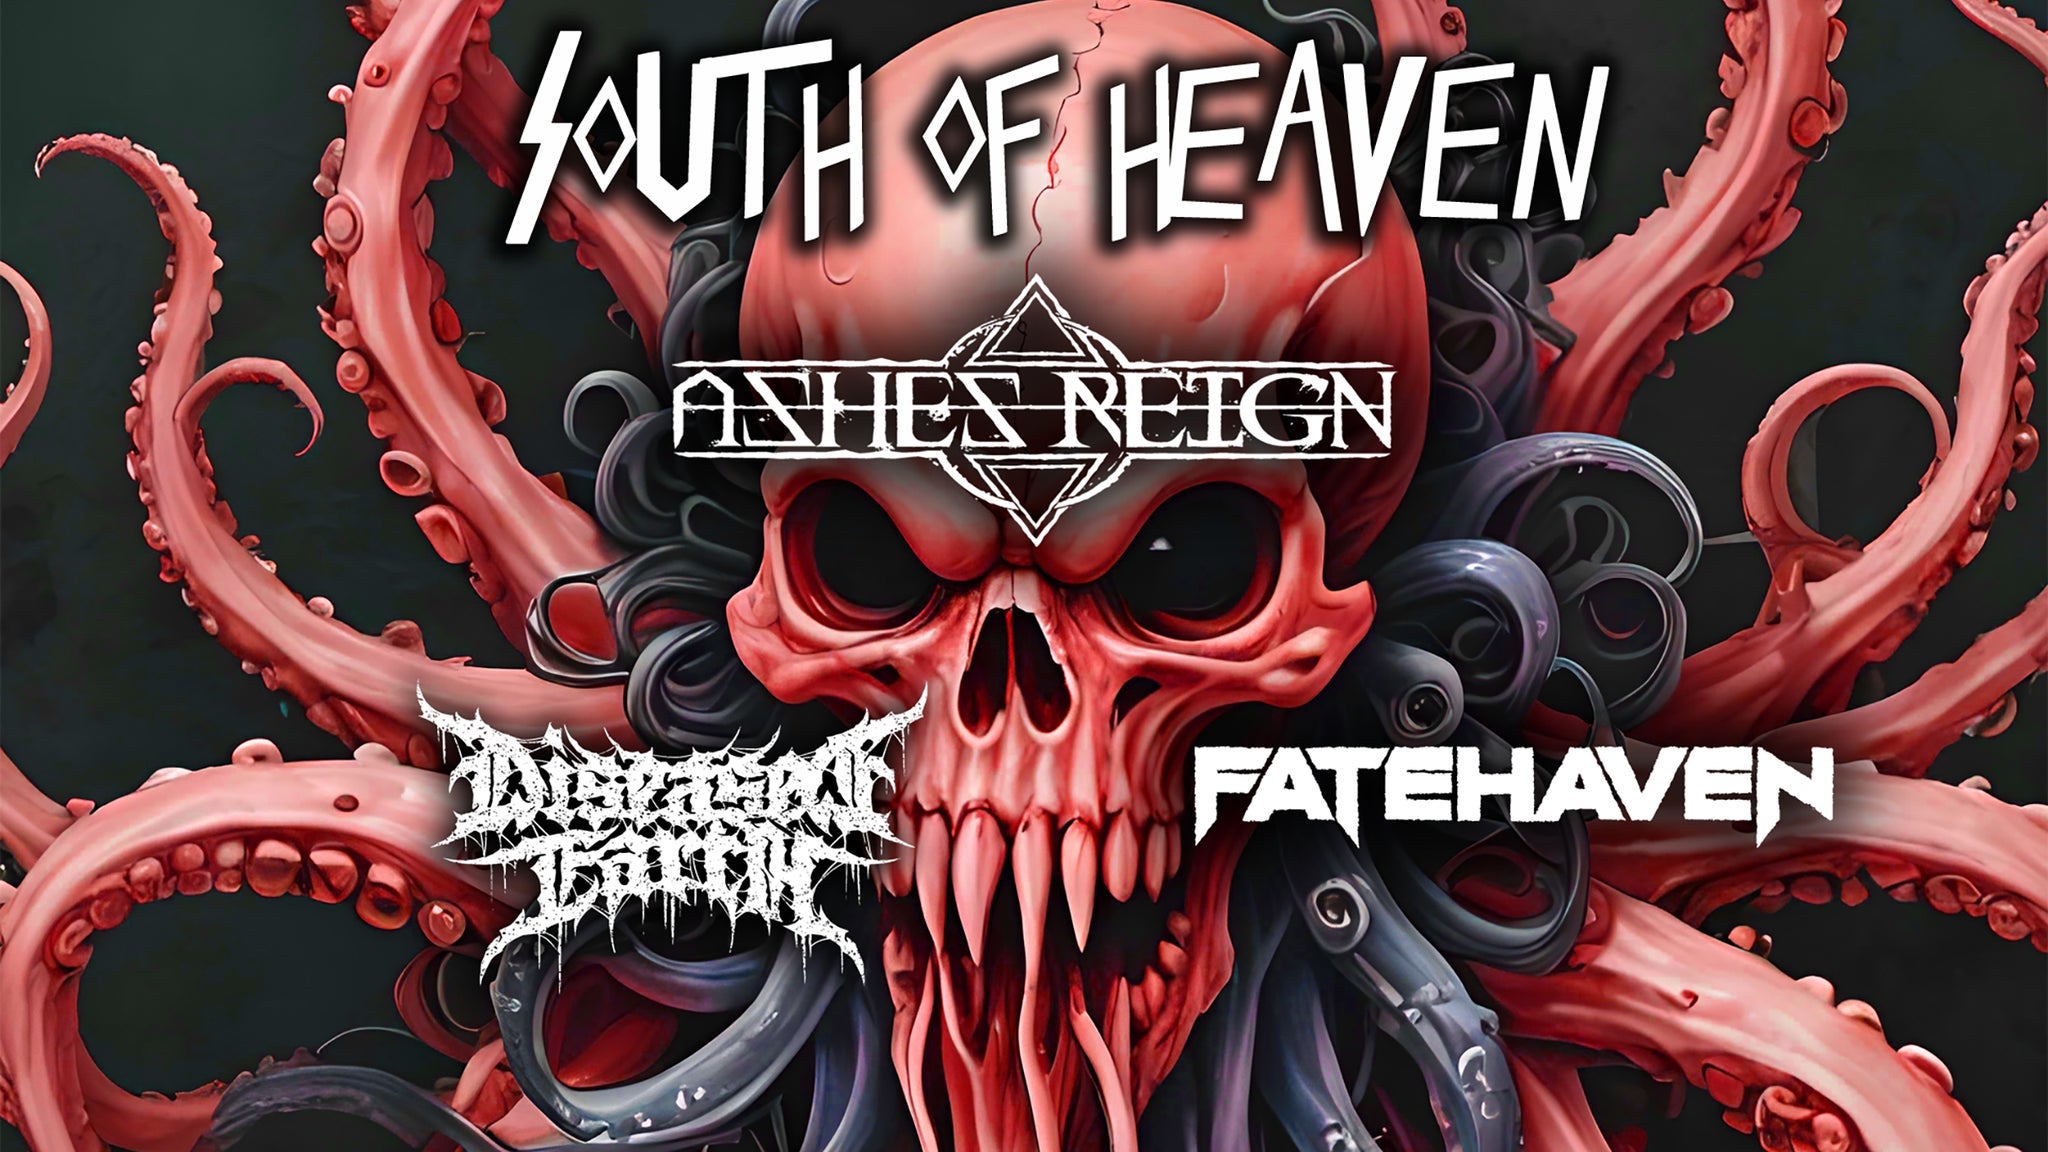 South Of Heaven with Ashes Reign, Diseased Earth & Fatehaven